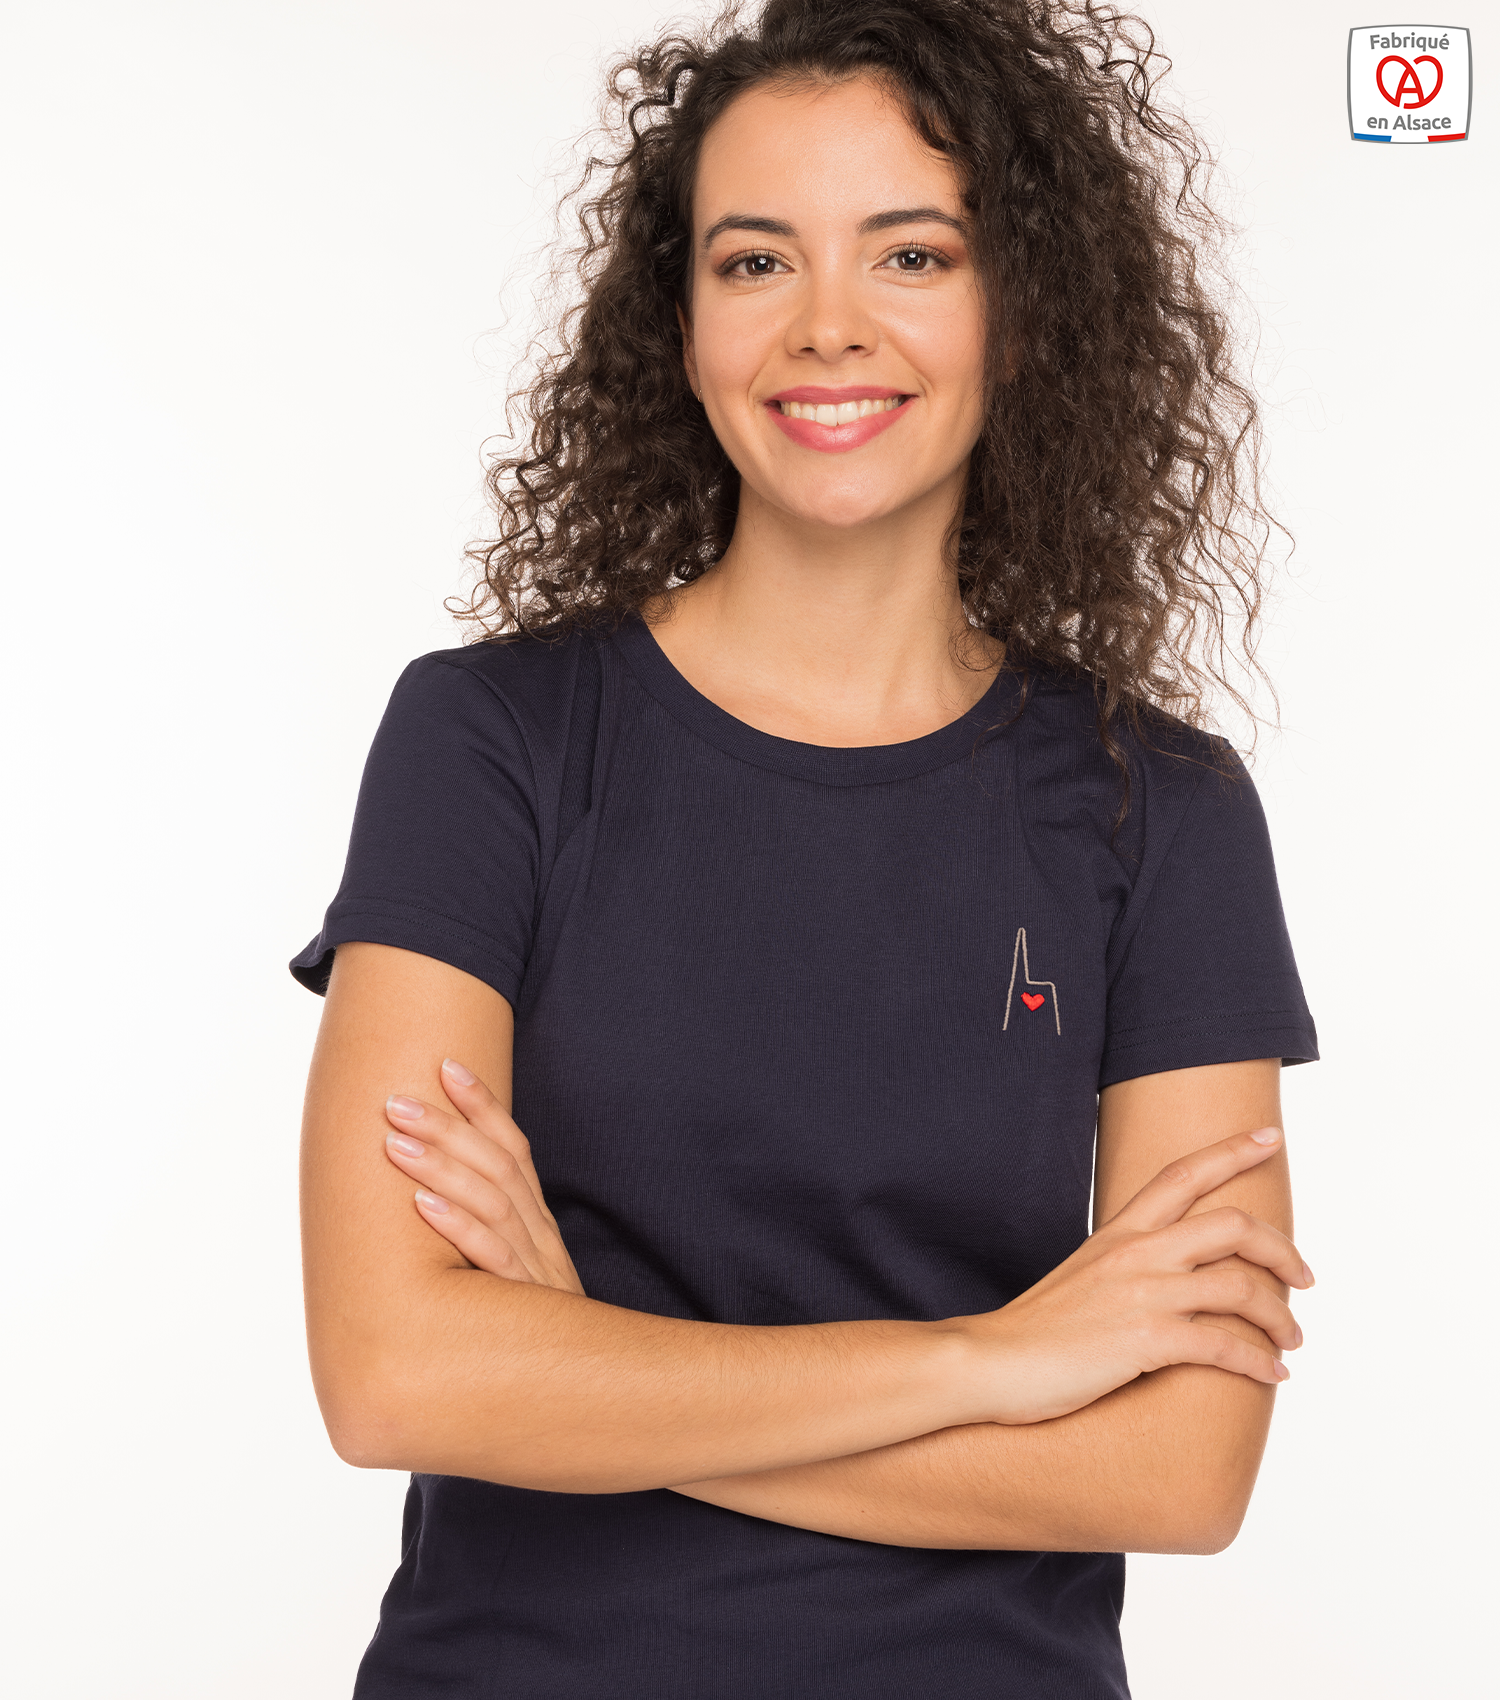 theim-t-shirt-femme-marine-cathedrale-made-in-alsace-1500x1700px